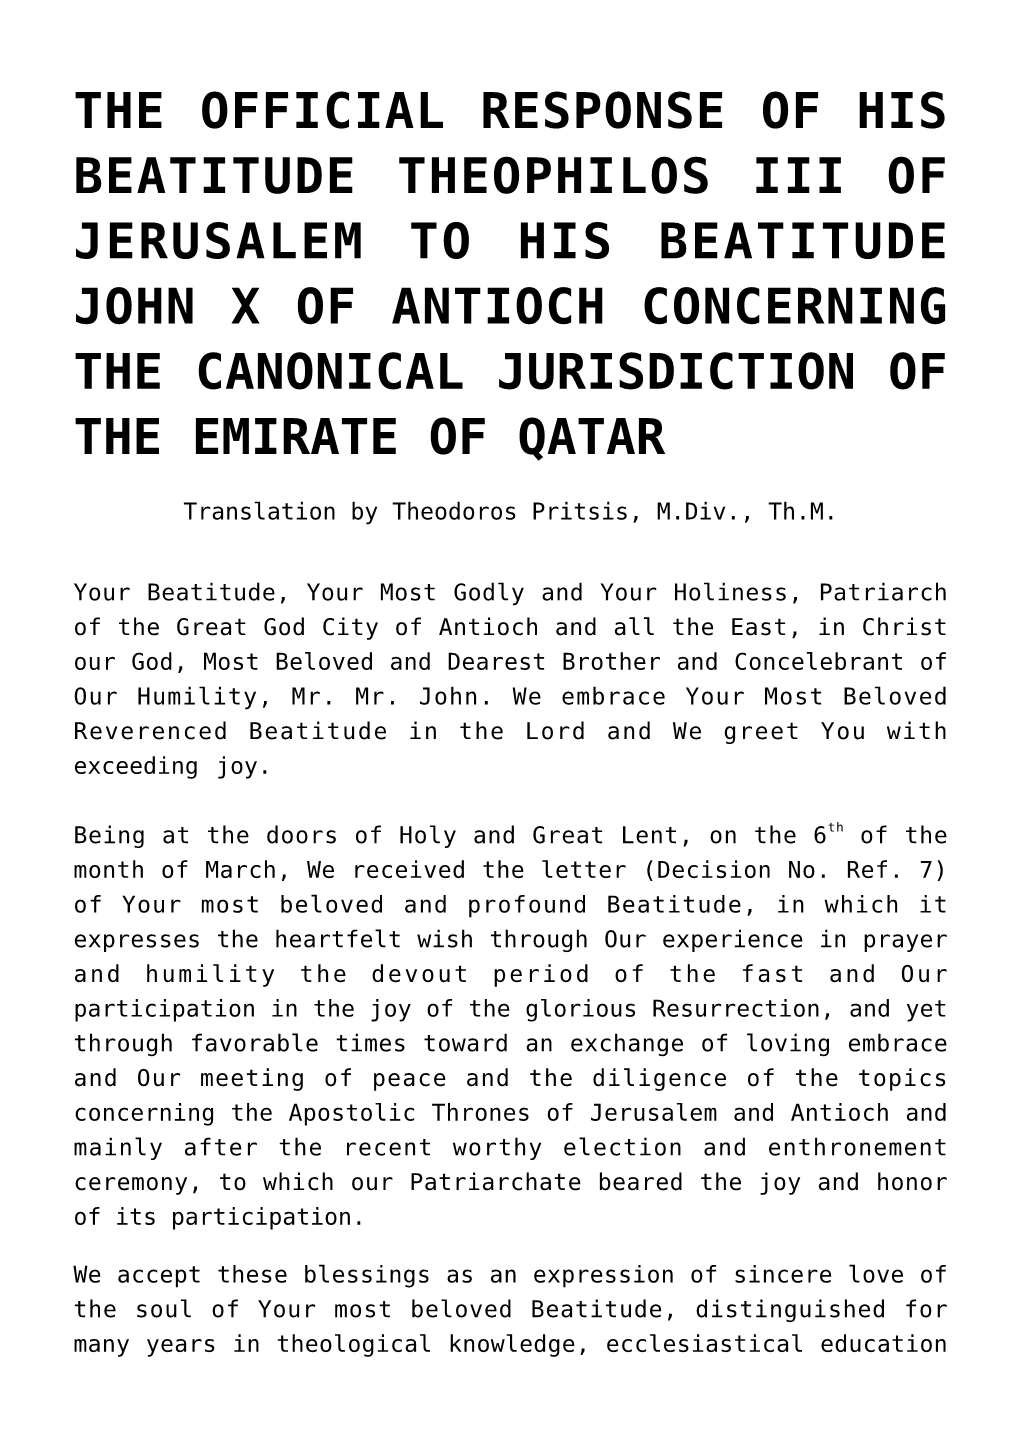 The Official Response of His Beatitude Theophilos Iii of Jerusalem to His Beatitude John X of Antioch Concerning the Canonical Jurisdiction of the Emirate of Qatar